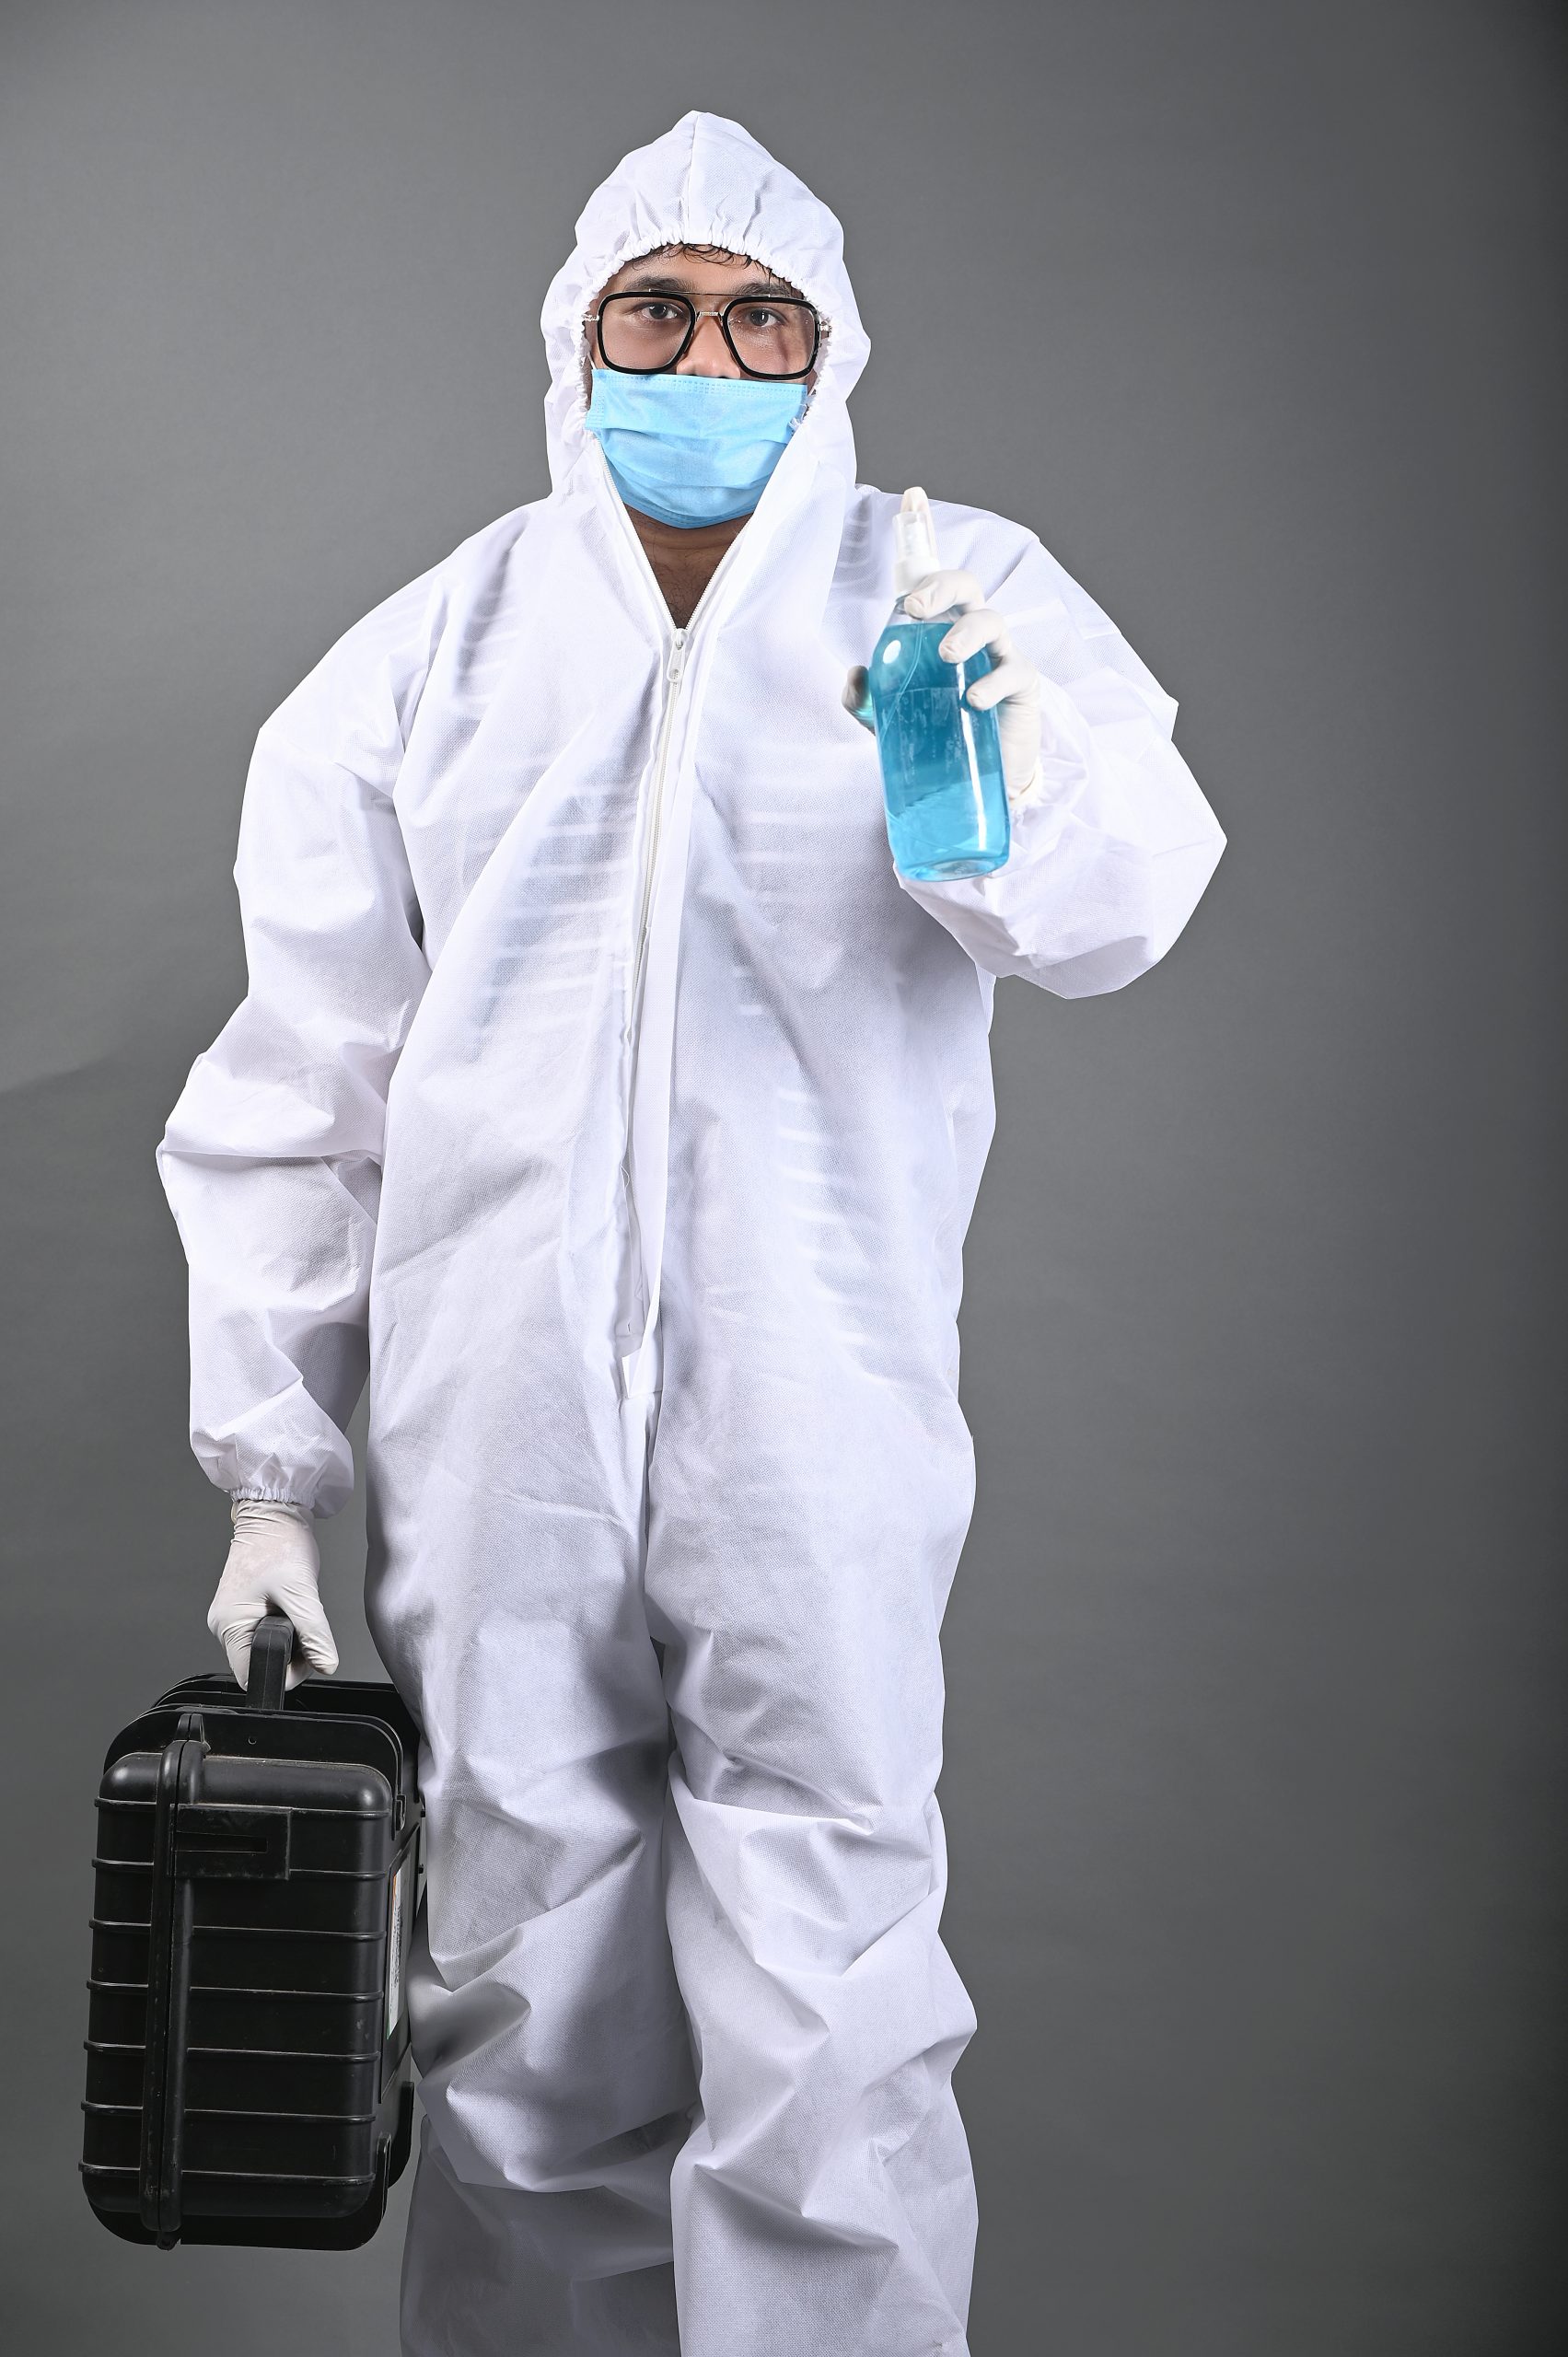 Man wearing PPE kit and holding Sanitizer in hand